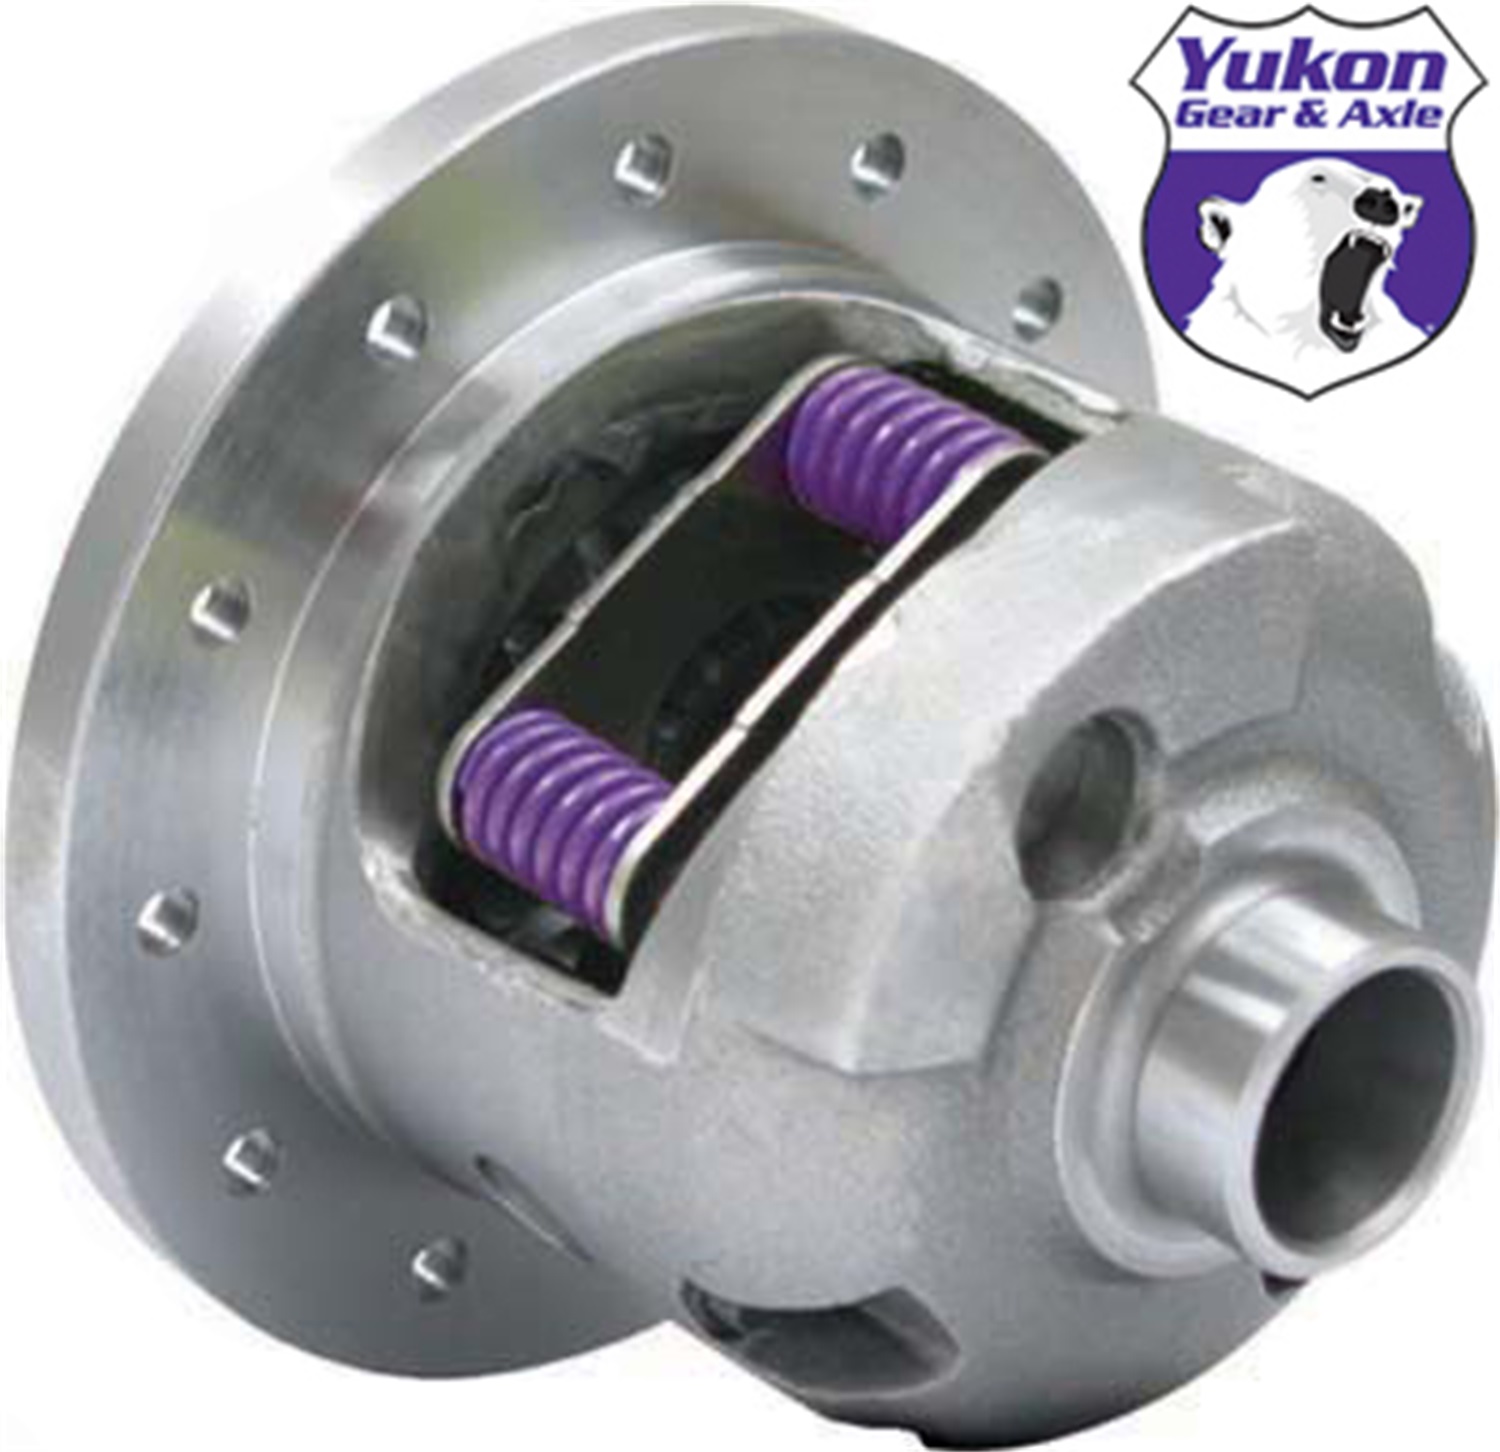 Yukon Gear & Axle Yukon Gear & Axle YDGGM8.5-3-28-1 Yukon Dura Grip Differential